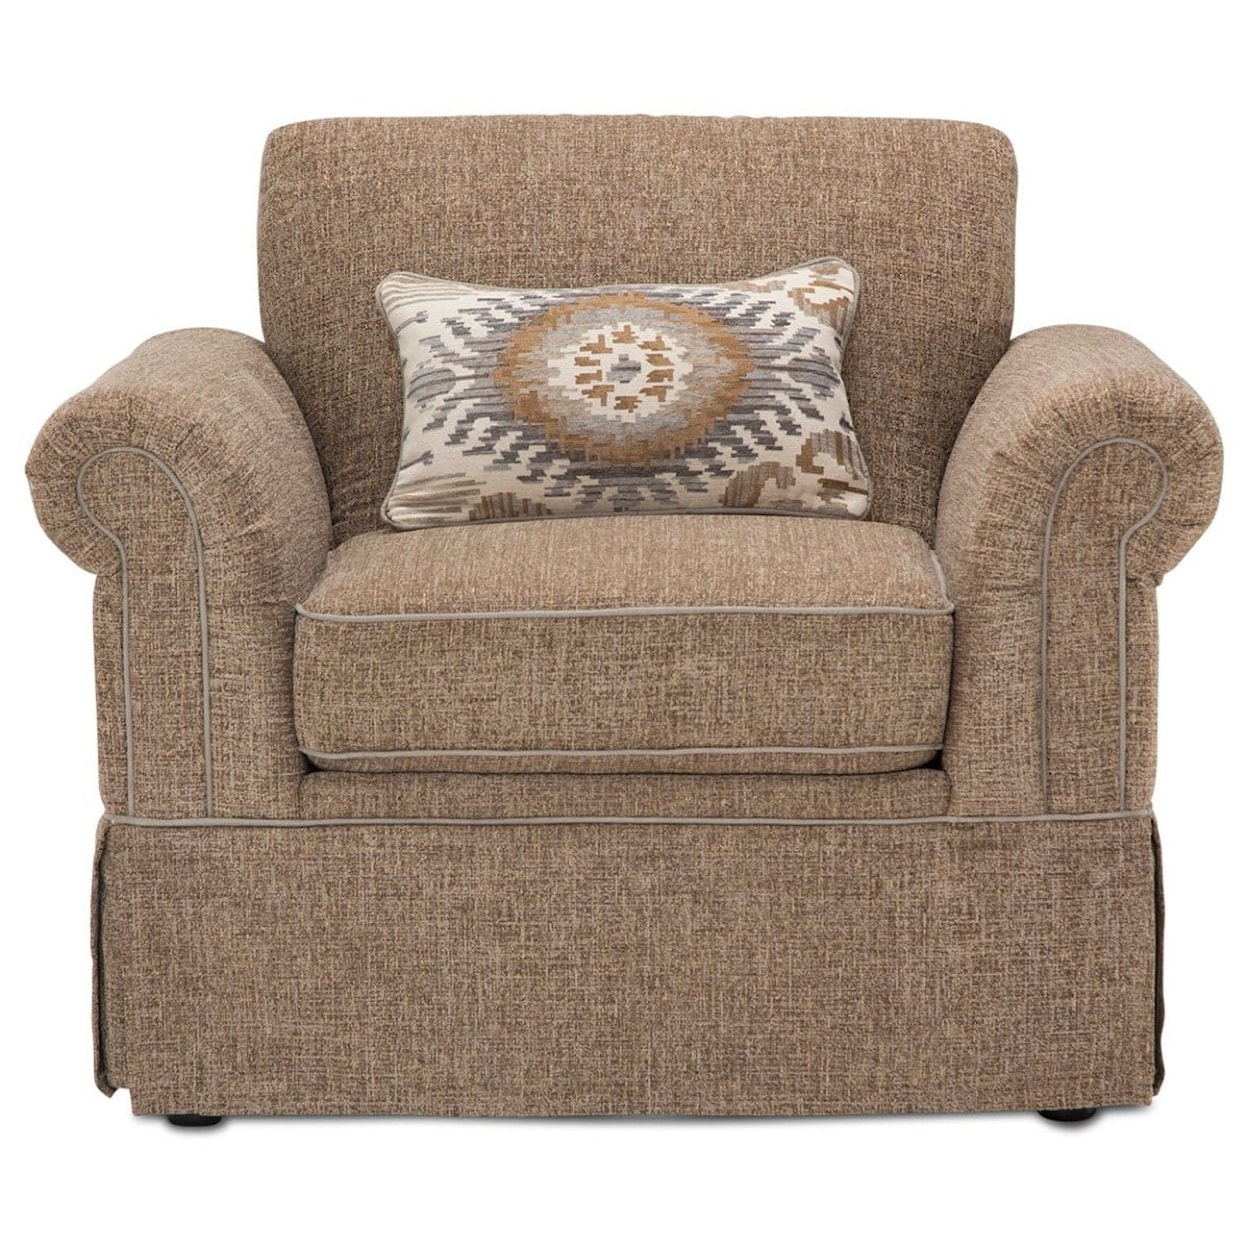 Michael Amini Carrollton Upholstered Accent Chair